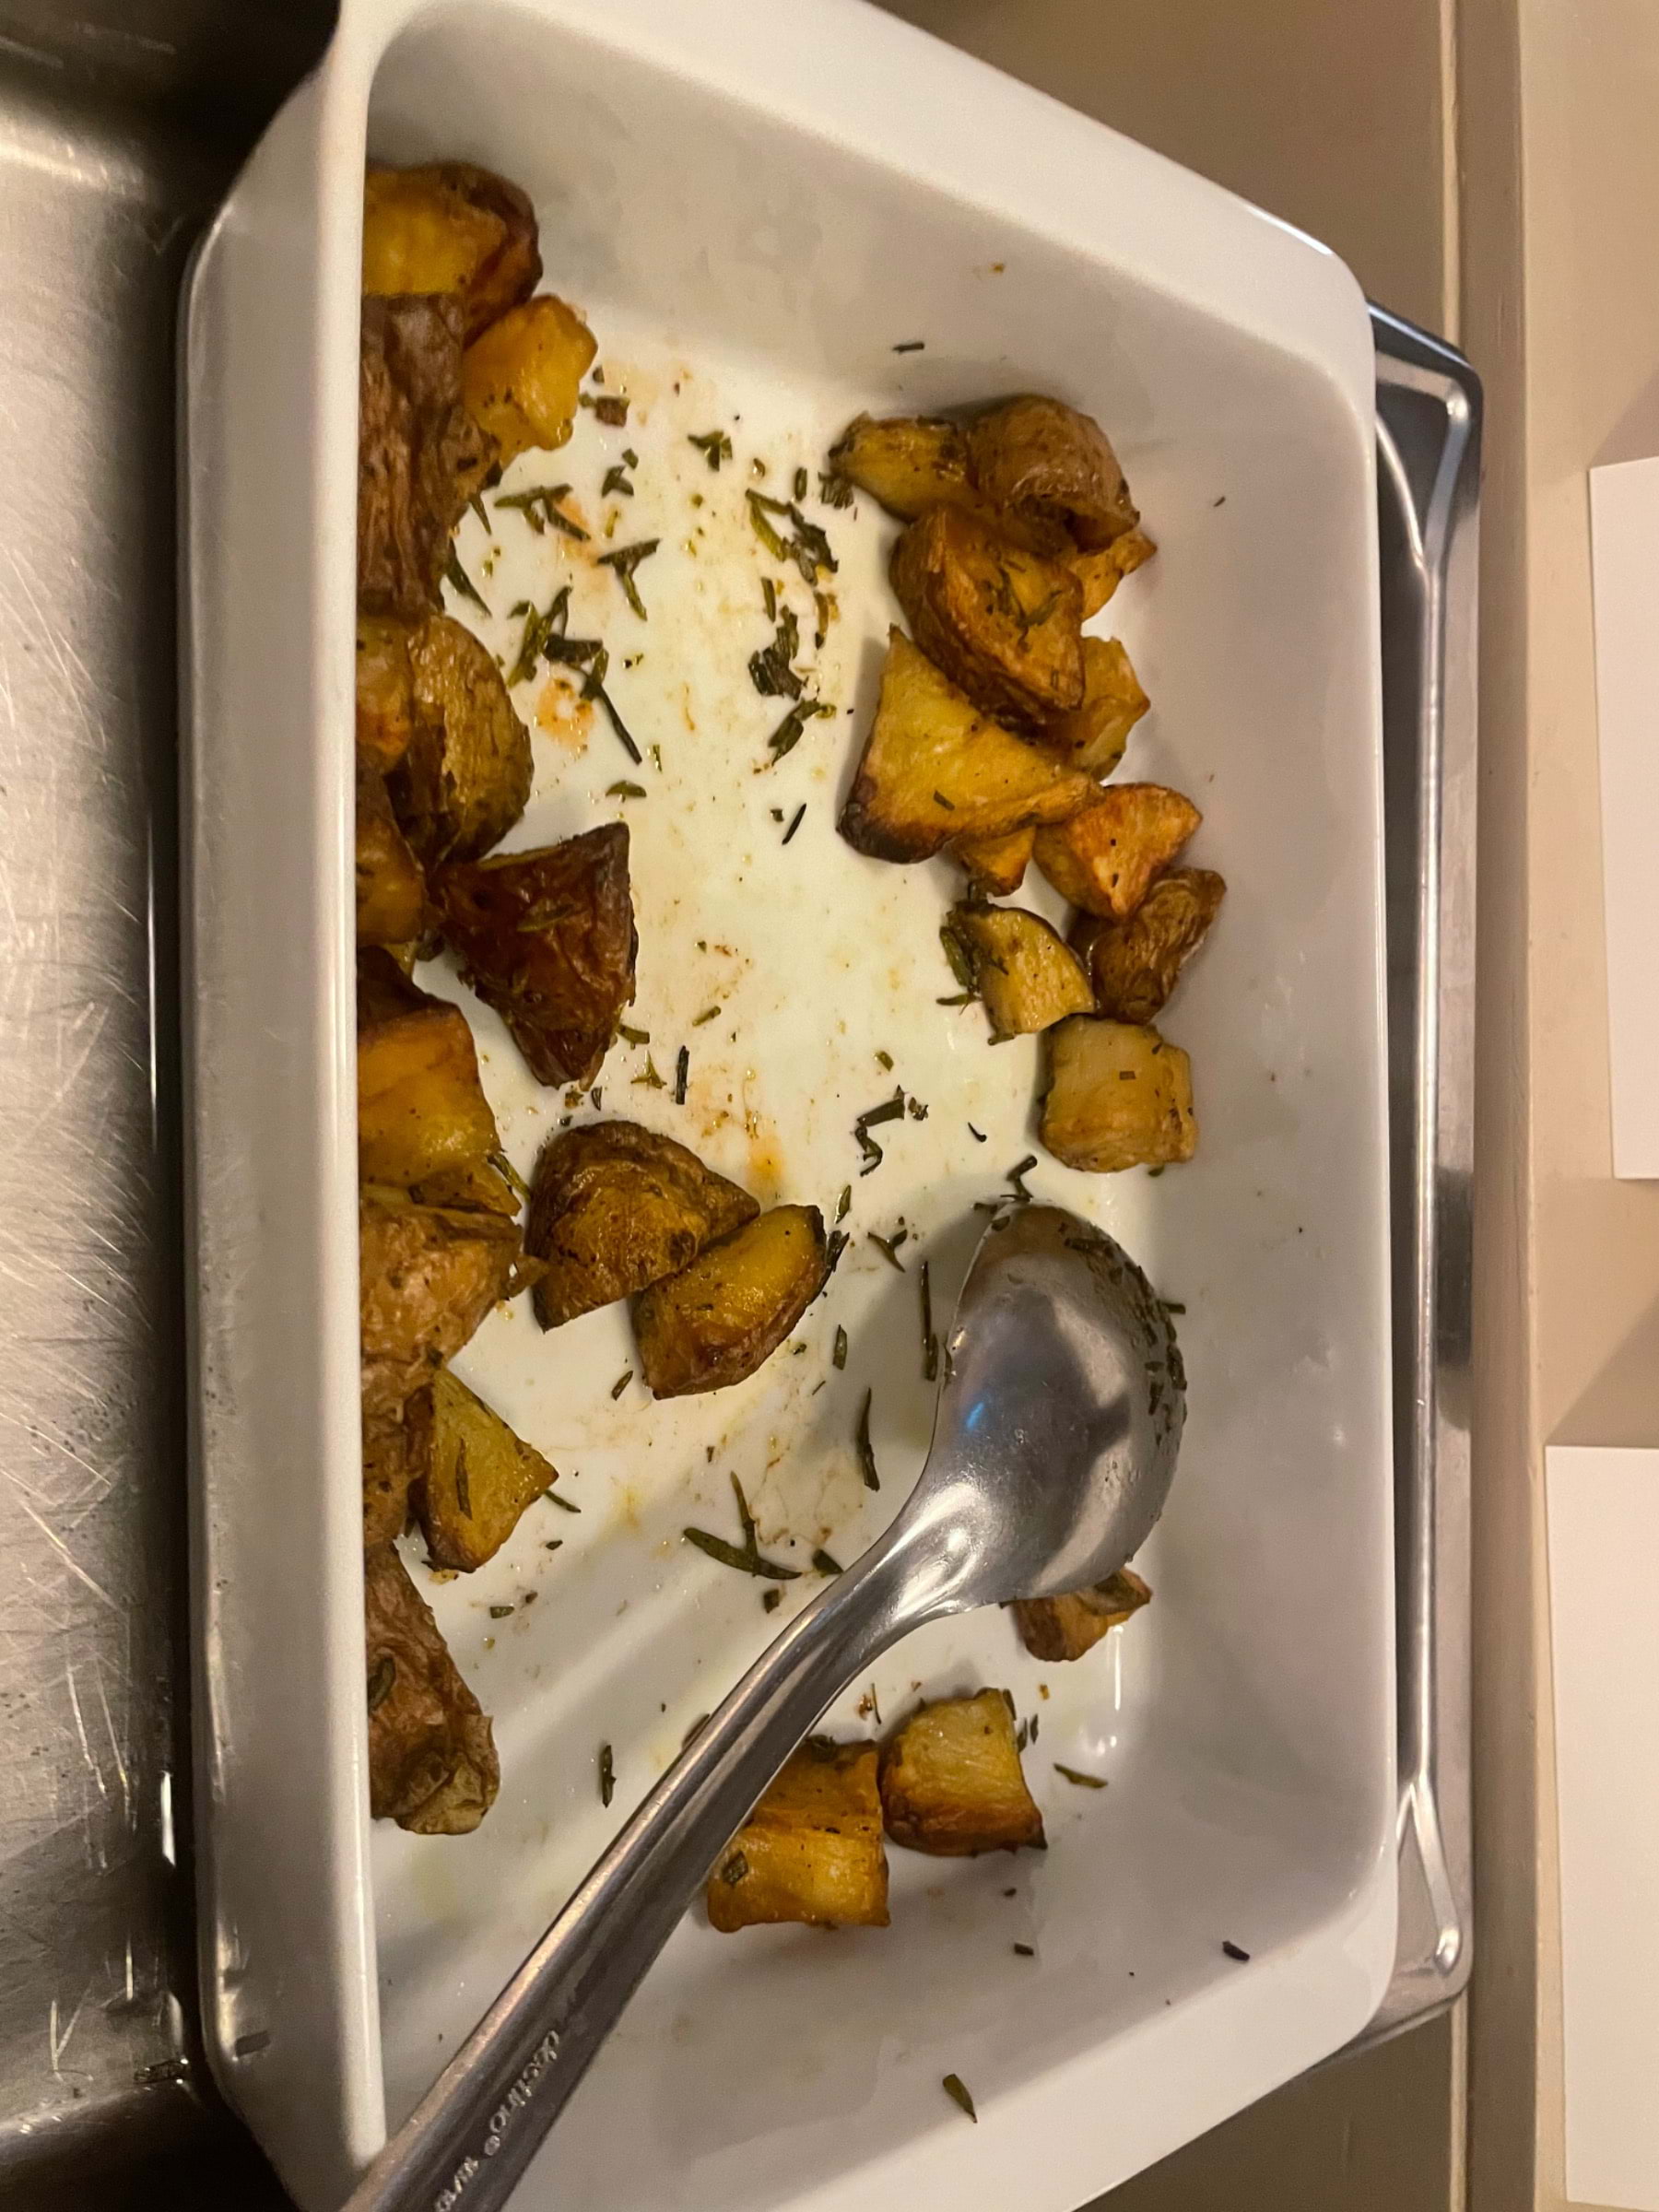 Kall potatis – Photo from Eataly by Maggie N. (02/12/2022)